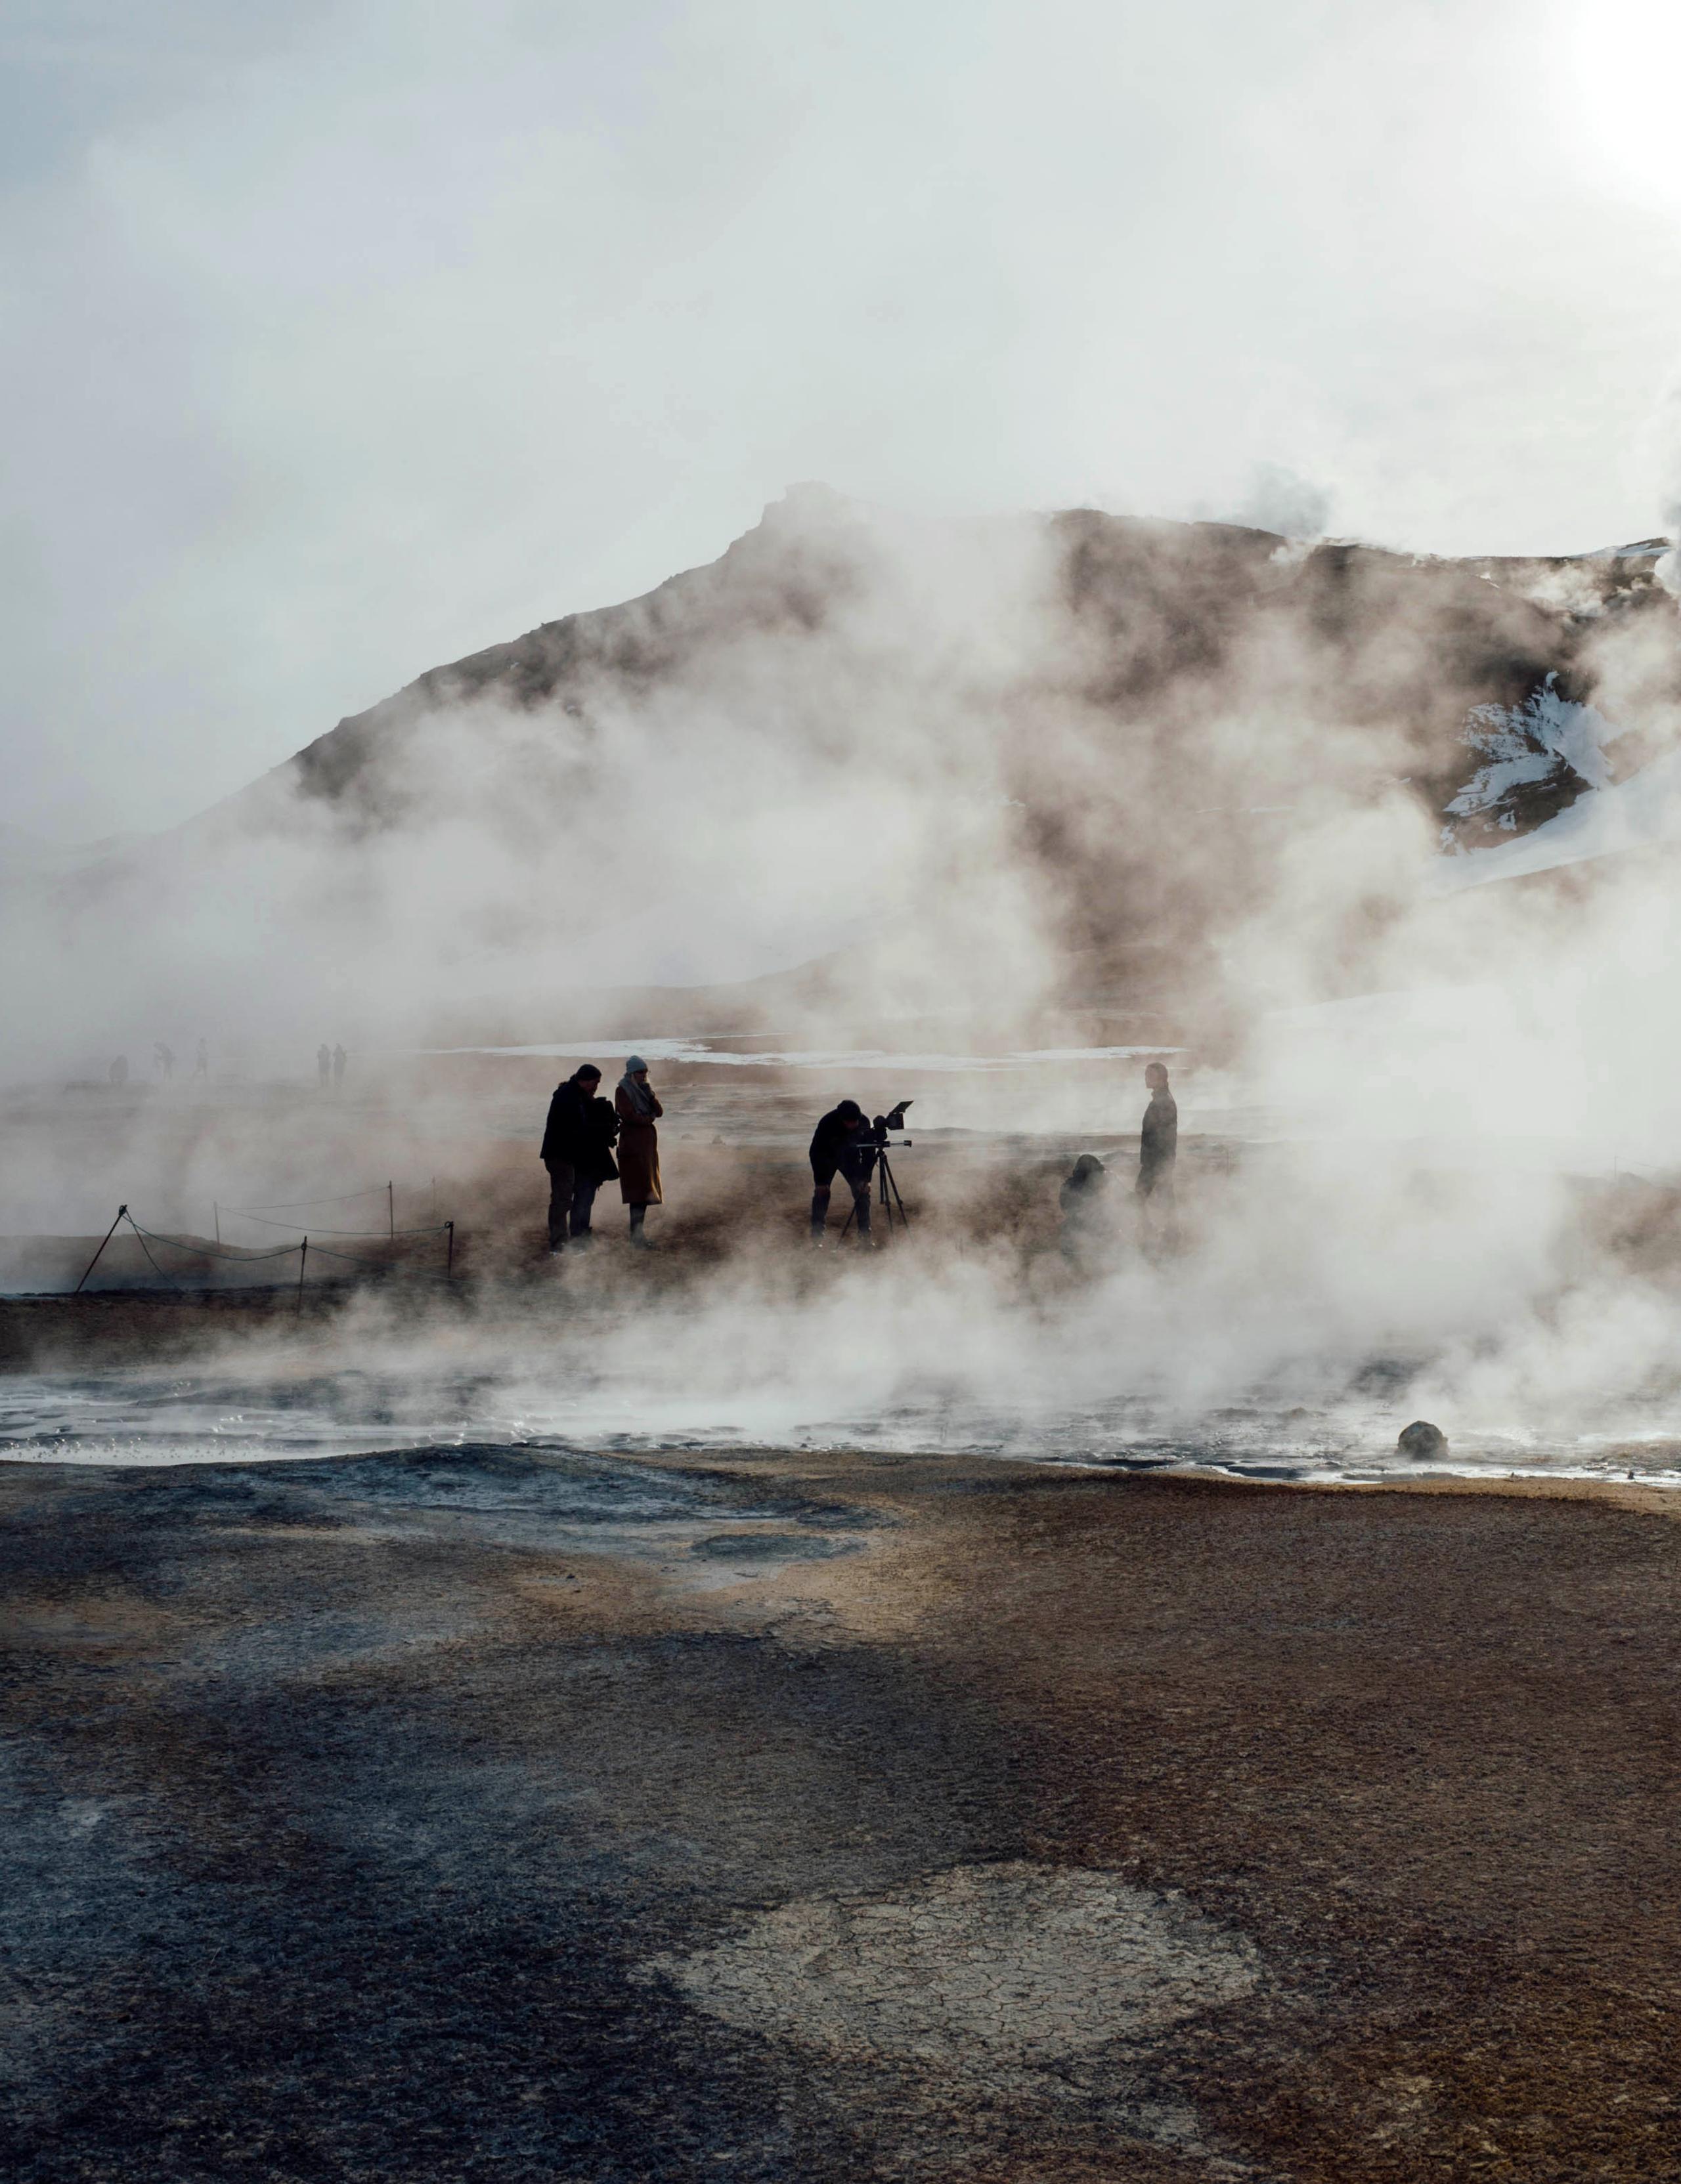 Behind-the-scenes of photoshoot in geothermal Iceland location with steam all around